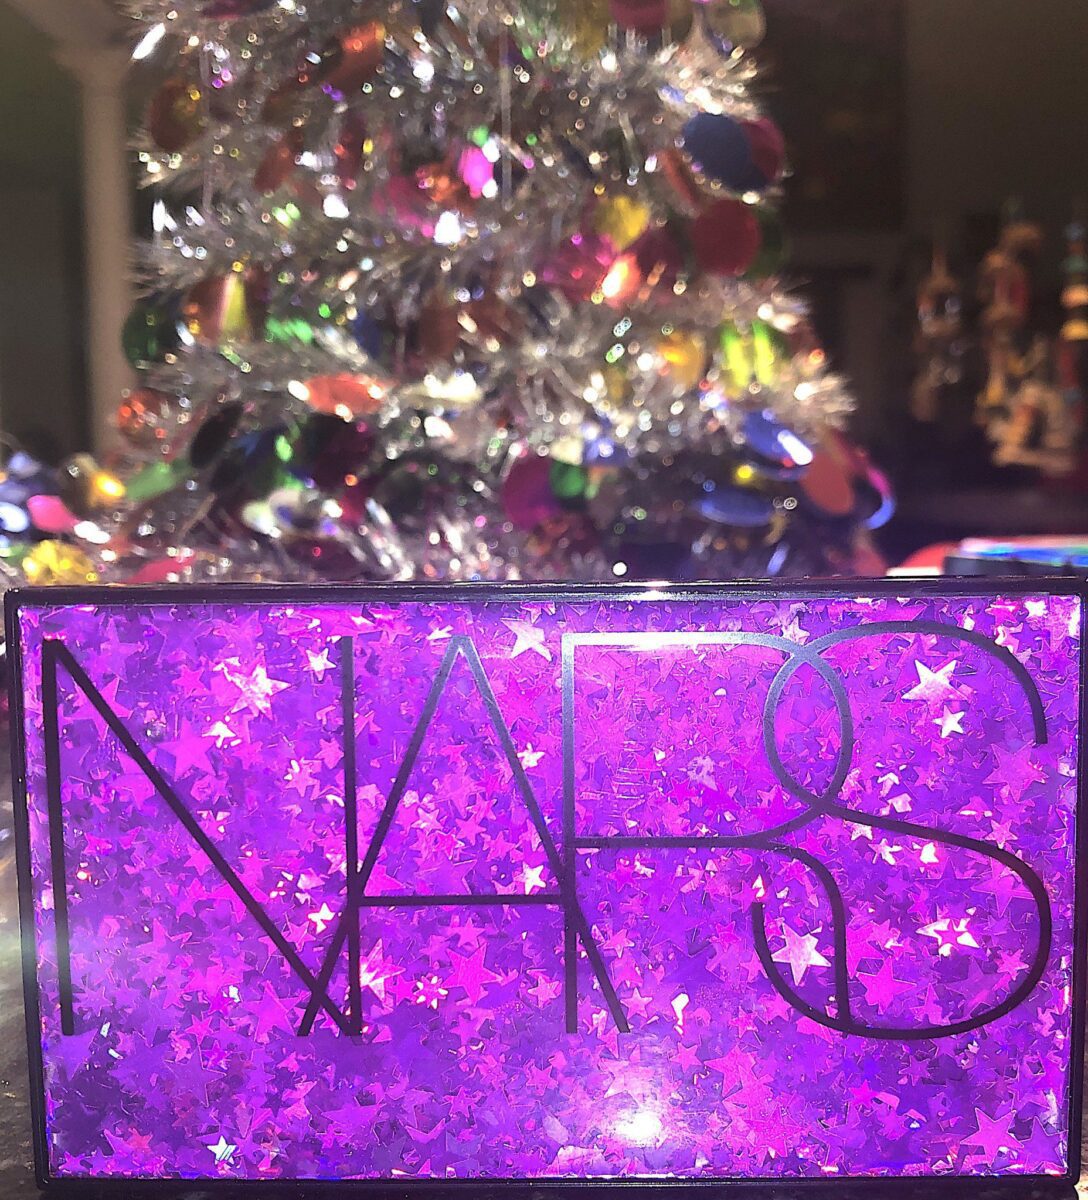 THE FRONT OF THE NARS STUDIO 54 HOLIDAY HYPED EYESHADOW PALETTE